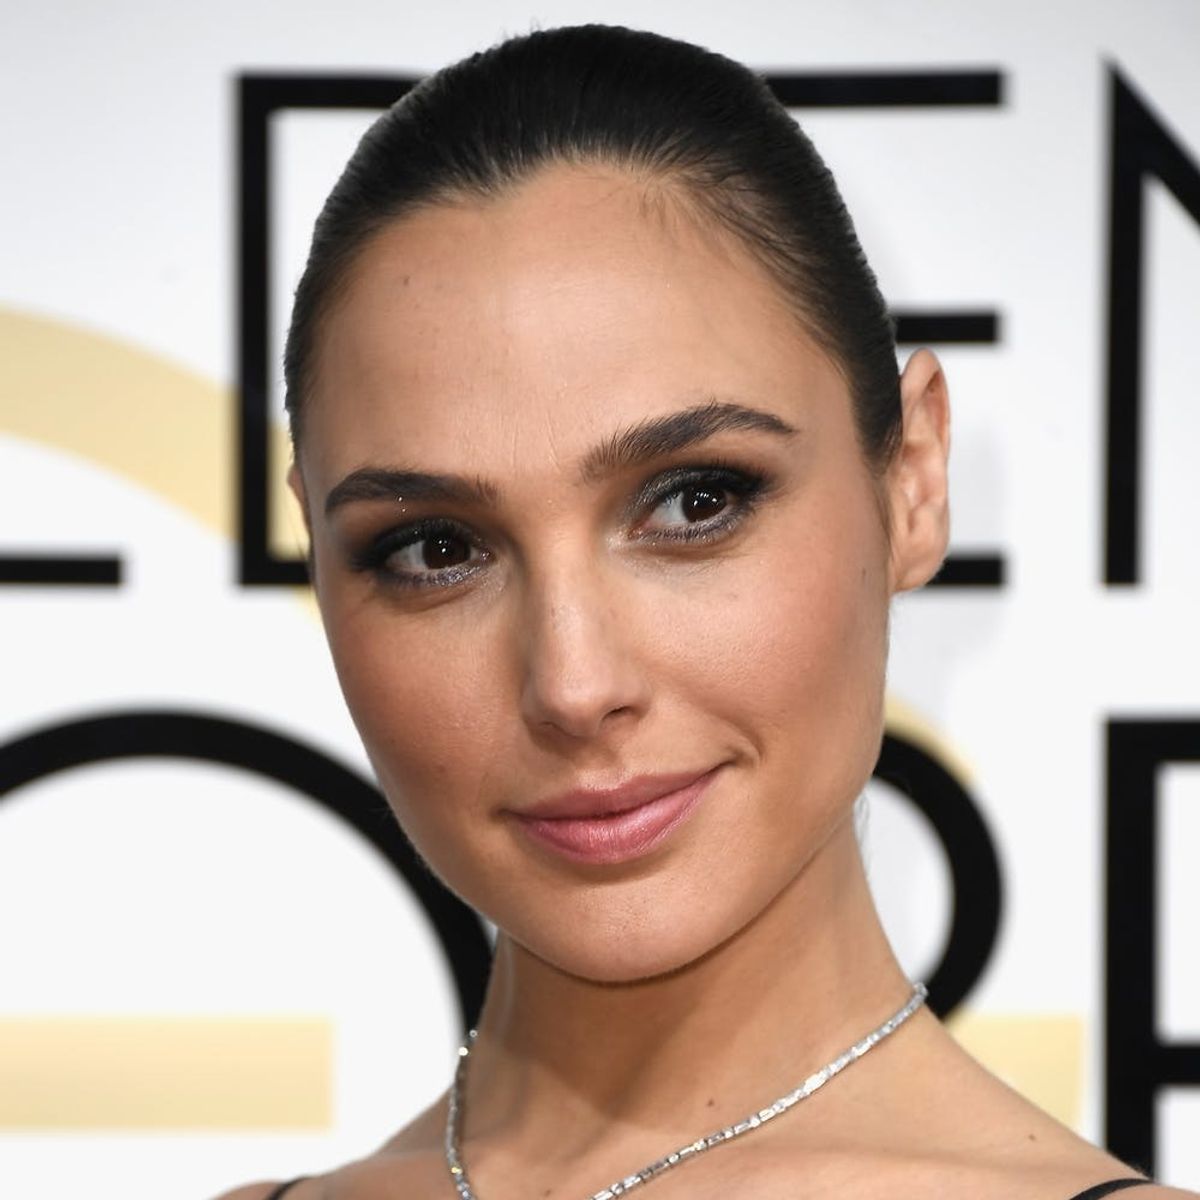 Gal Gadot Is the Ultimate Badass Babe in the New Wonder Woman Trailer